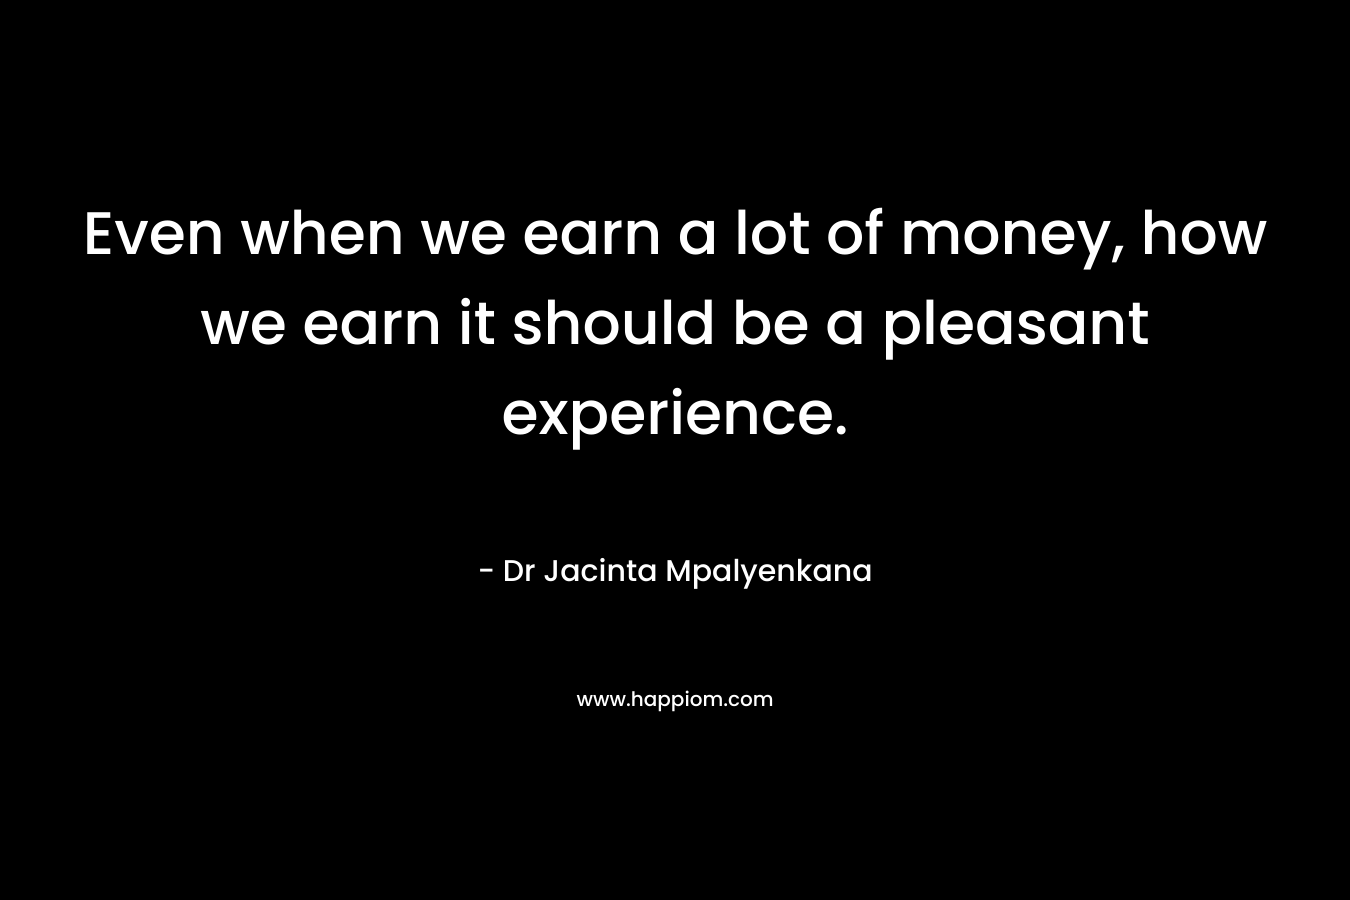 Even when we earn a lot of money, how we earn it should be a pleasant experience.